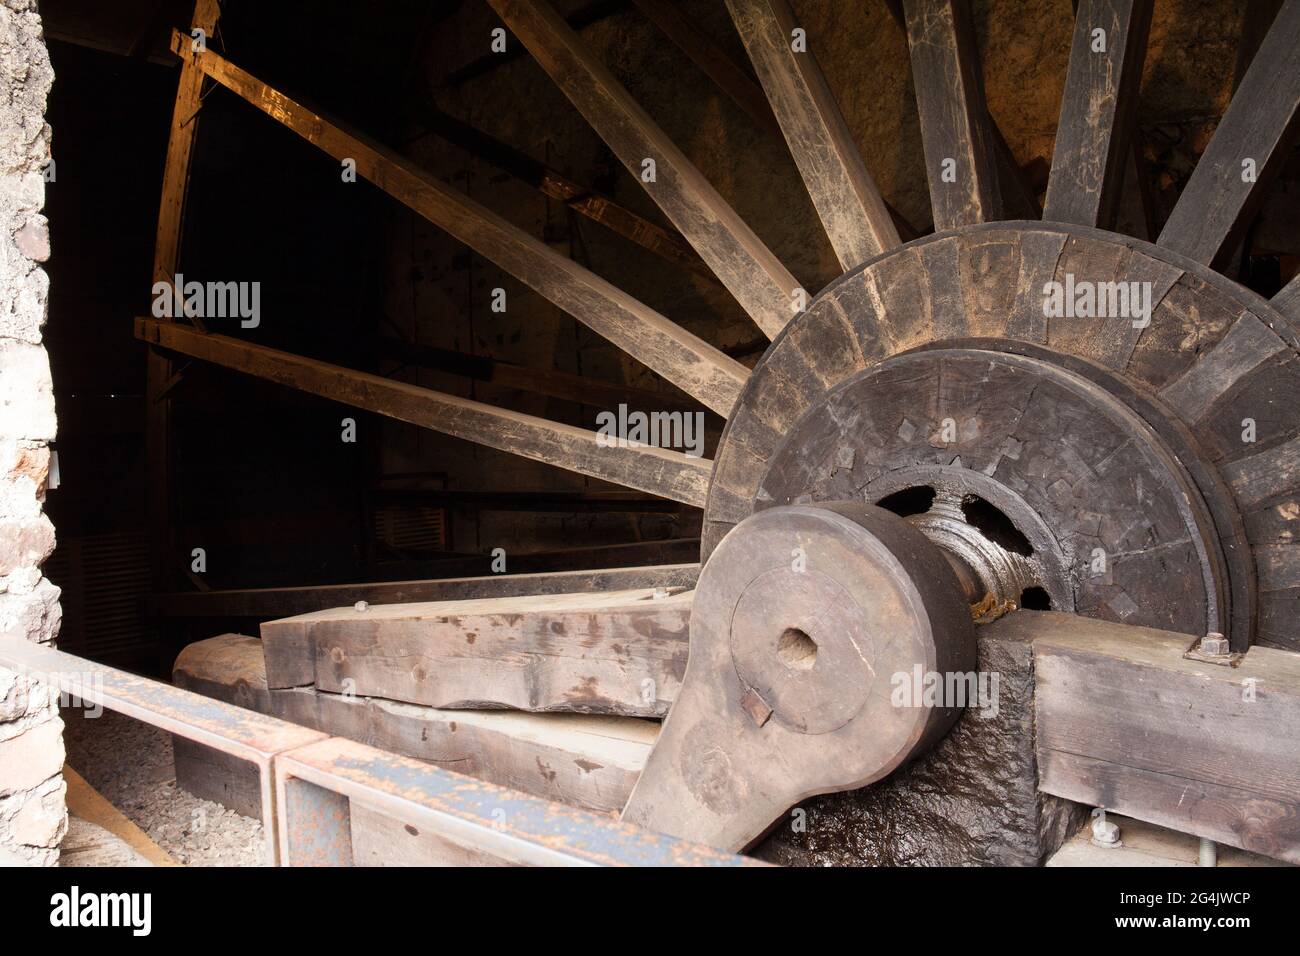 PERSHYTTAN, SWEDEN ON MAY 18, 2021. View of the old smeltery, Iron foundry. Transmission equipment. Editorial use. Stock Photo